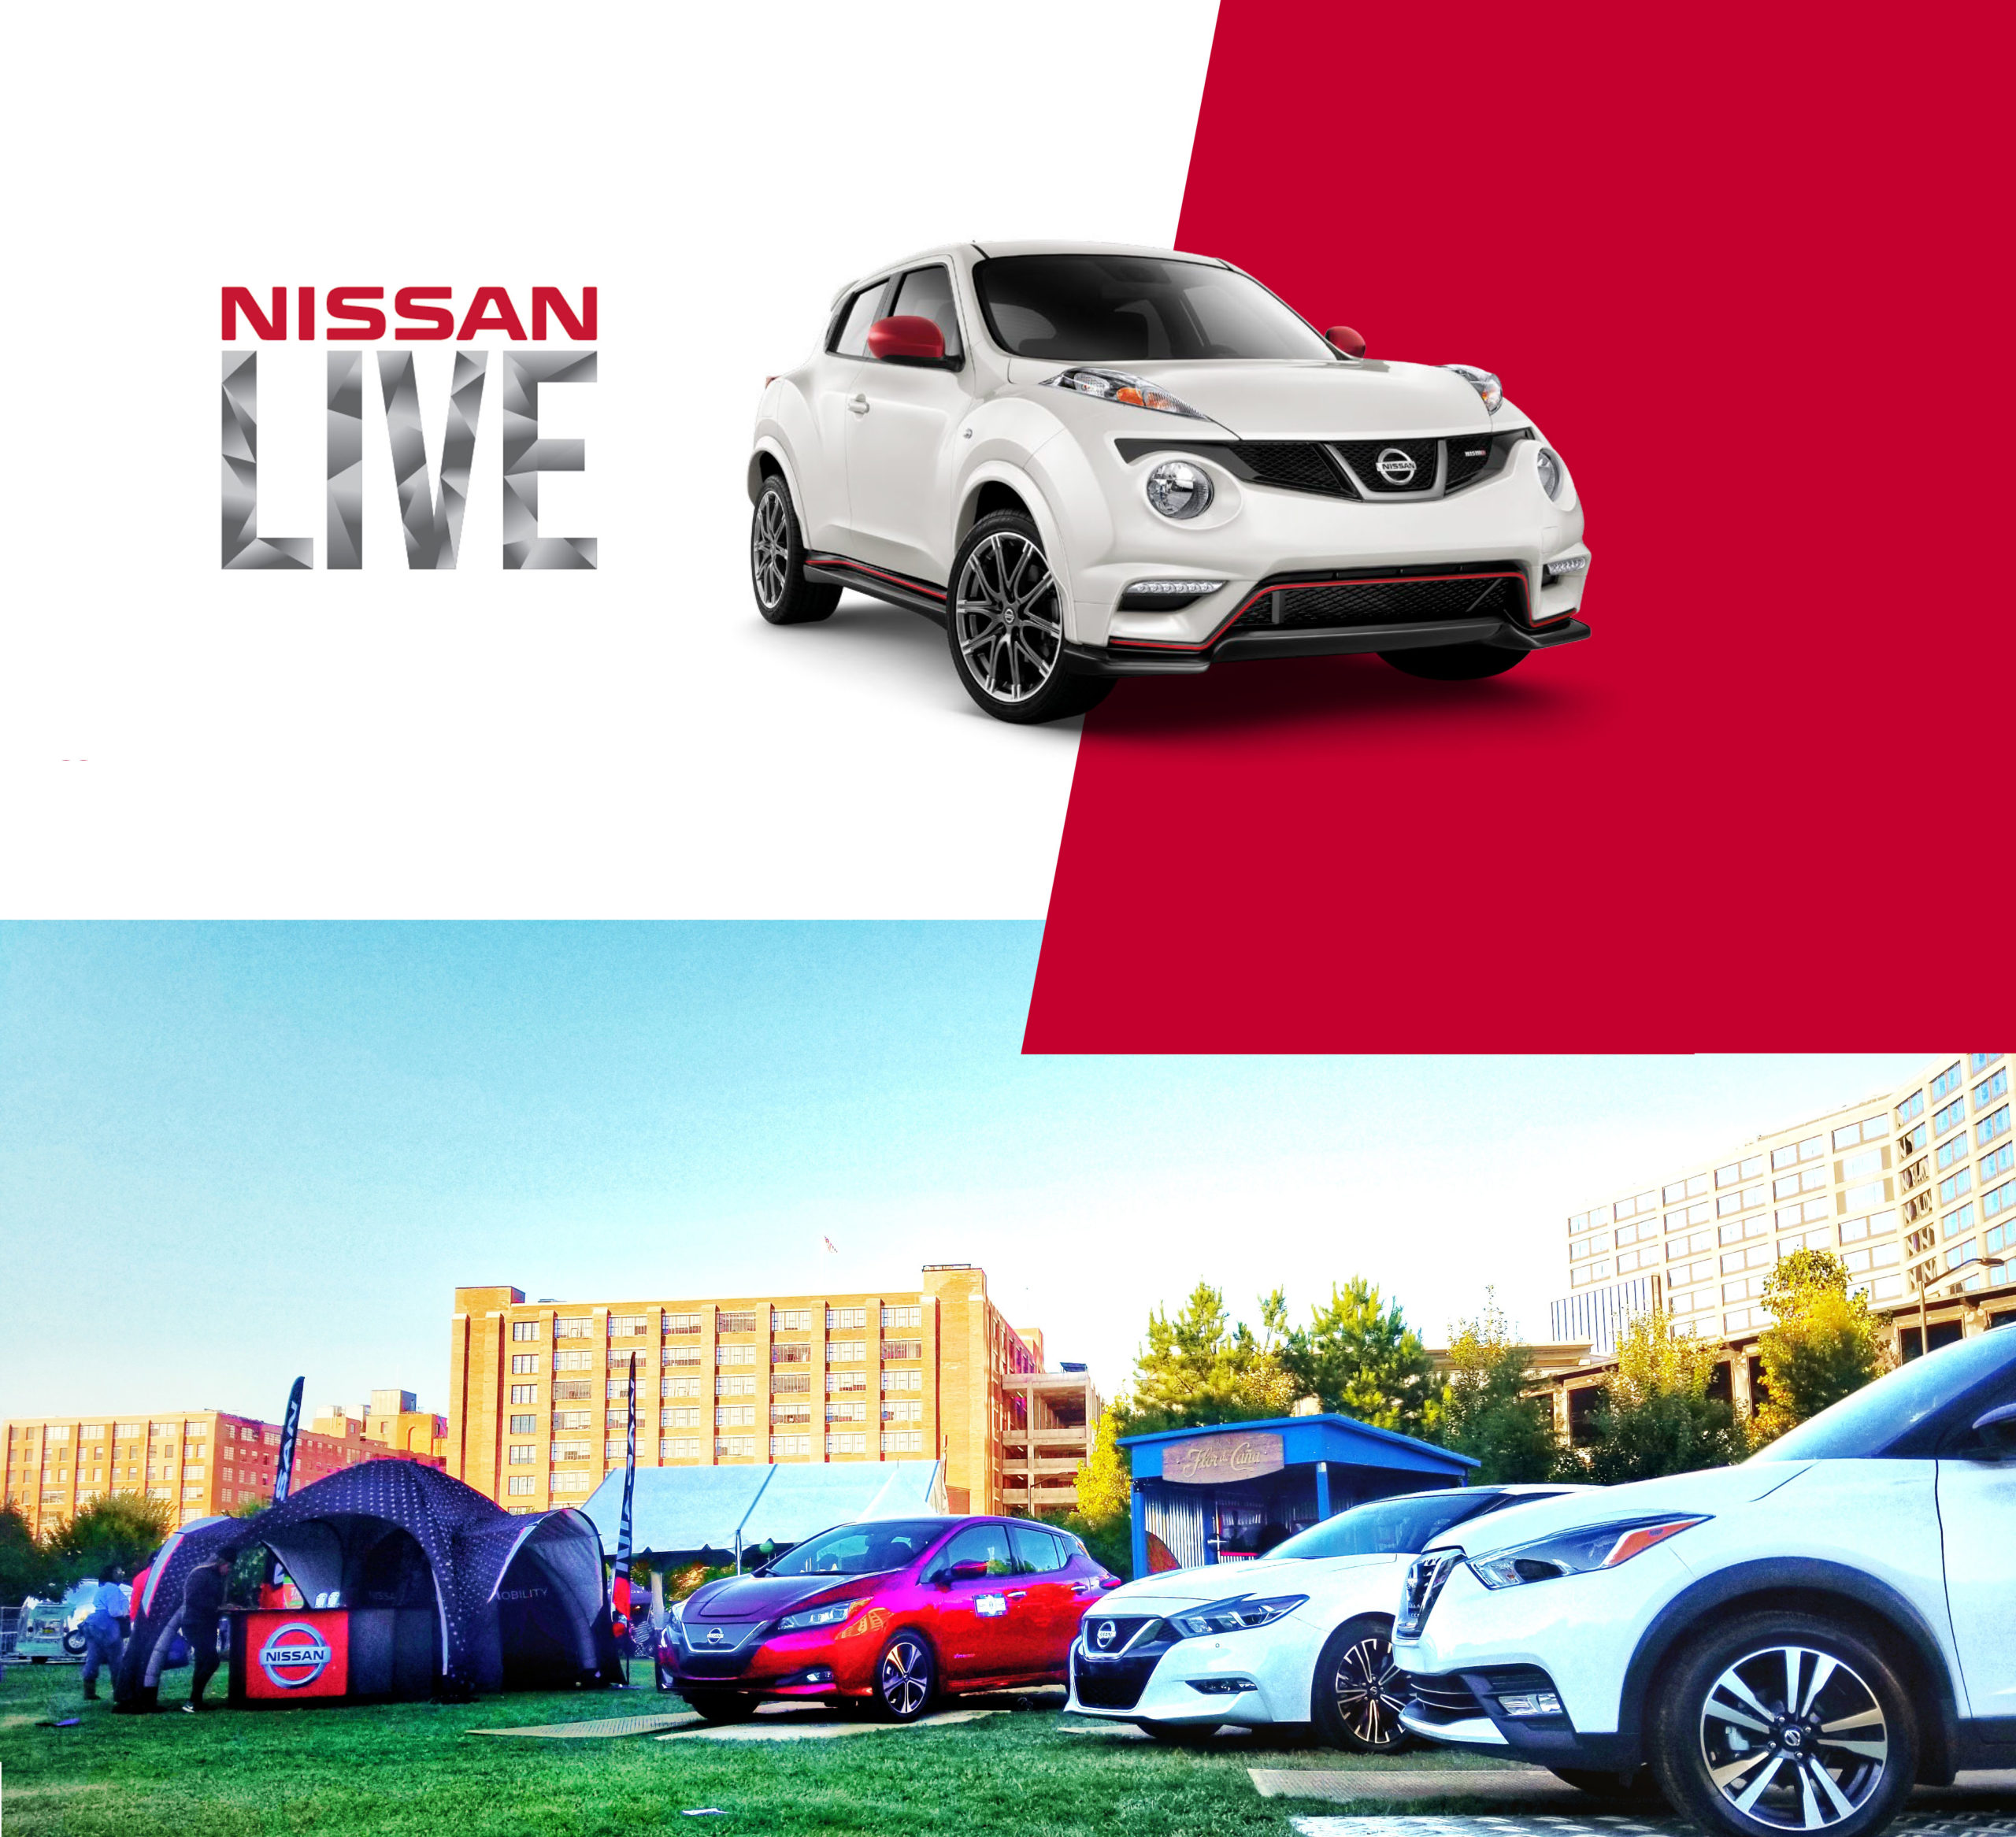 A graphic showing the Nissan Live logo and cars at an event